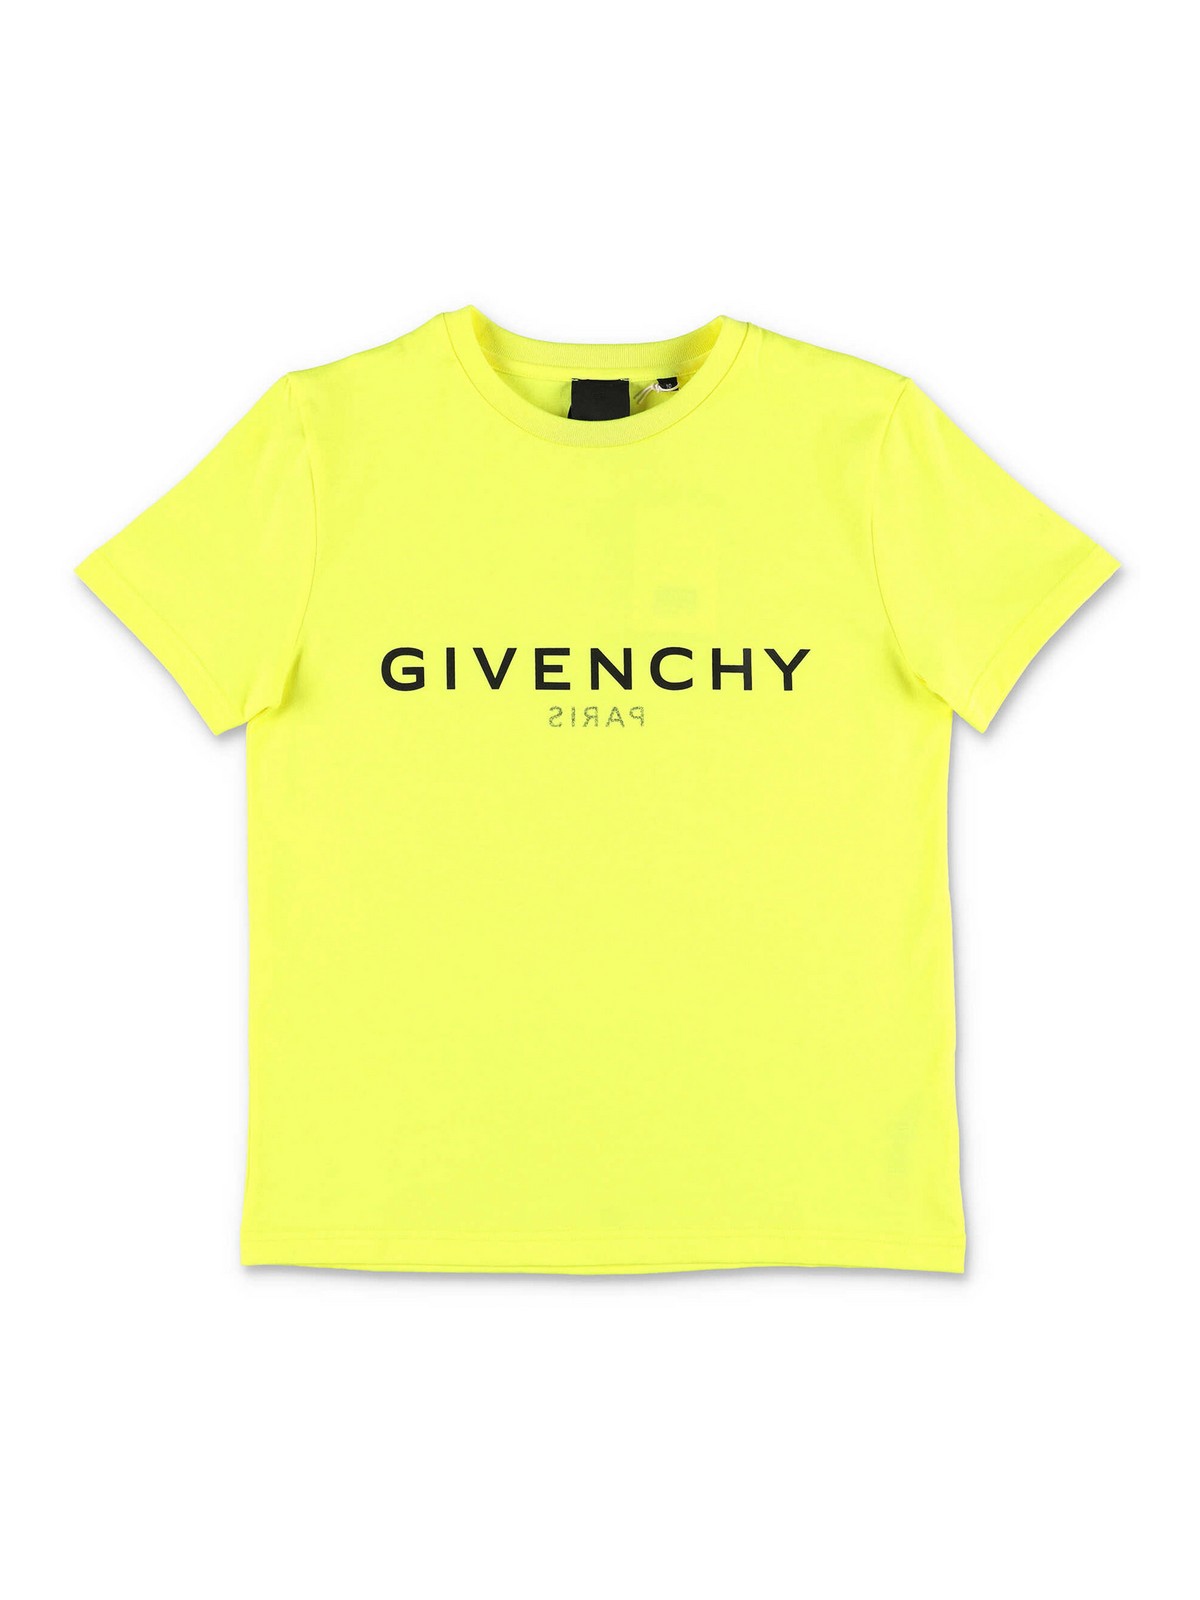 Total 90+ imagen givenchy yellow t shirt